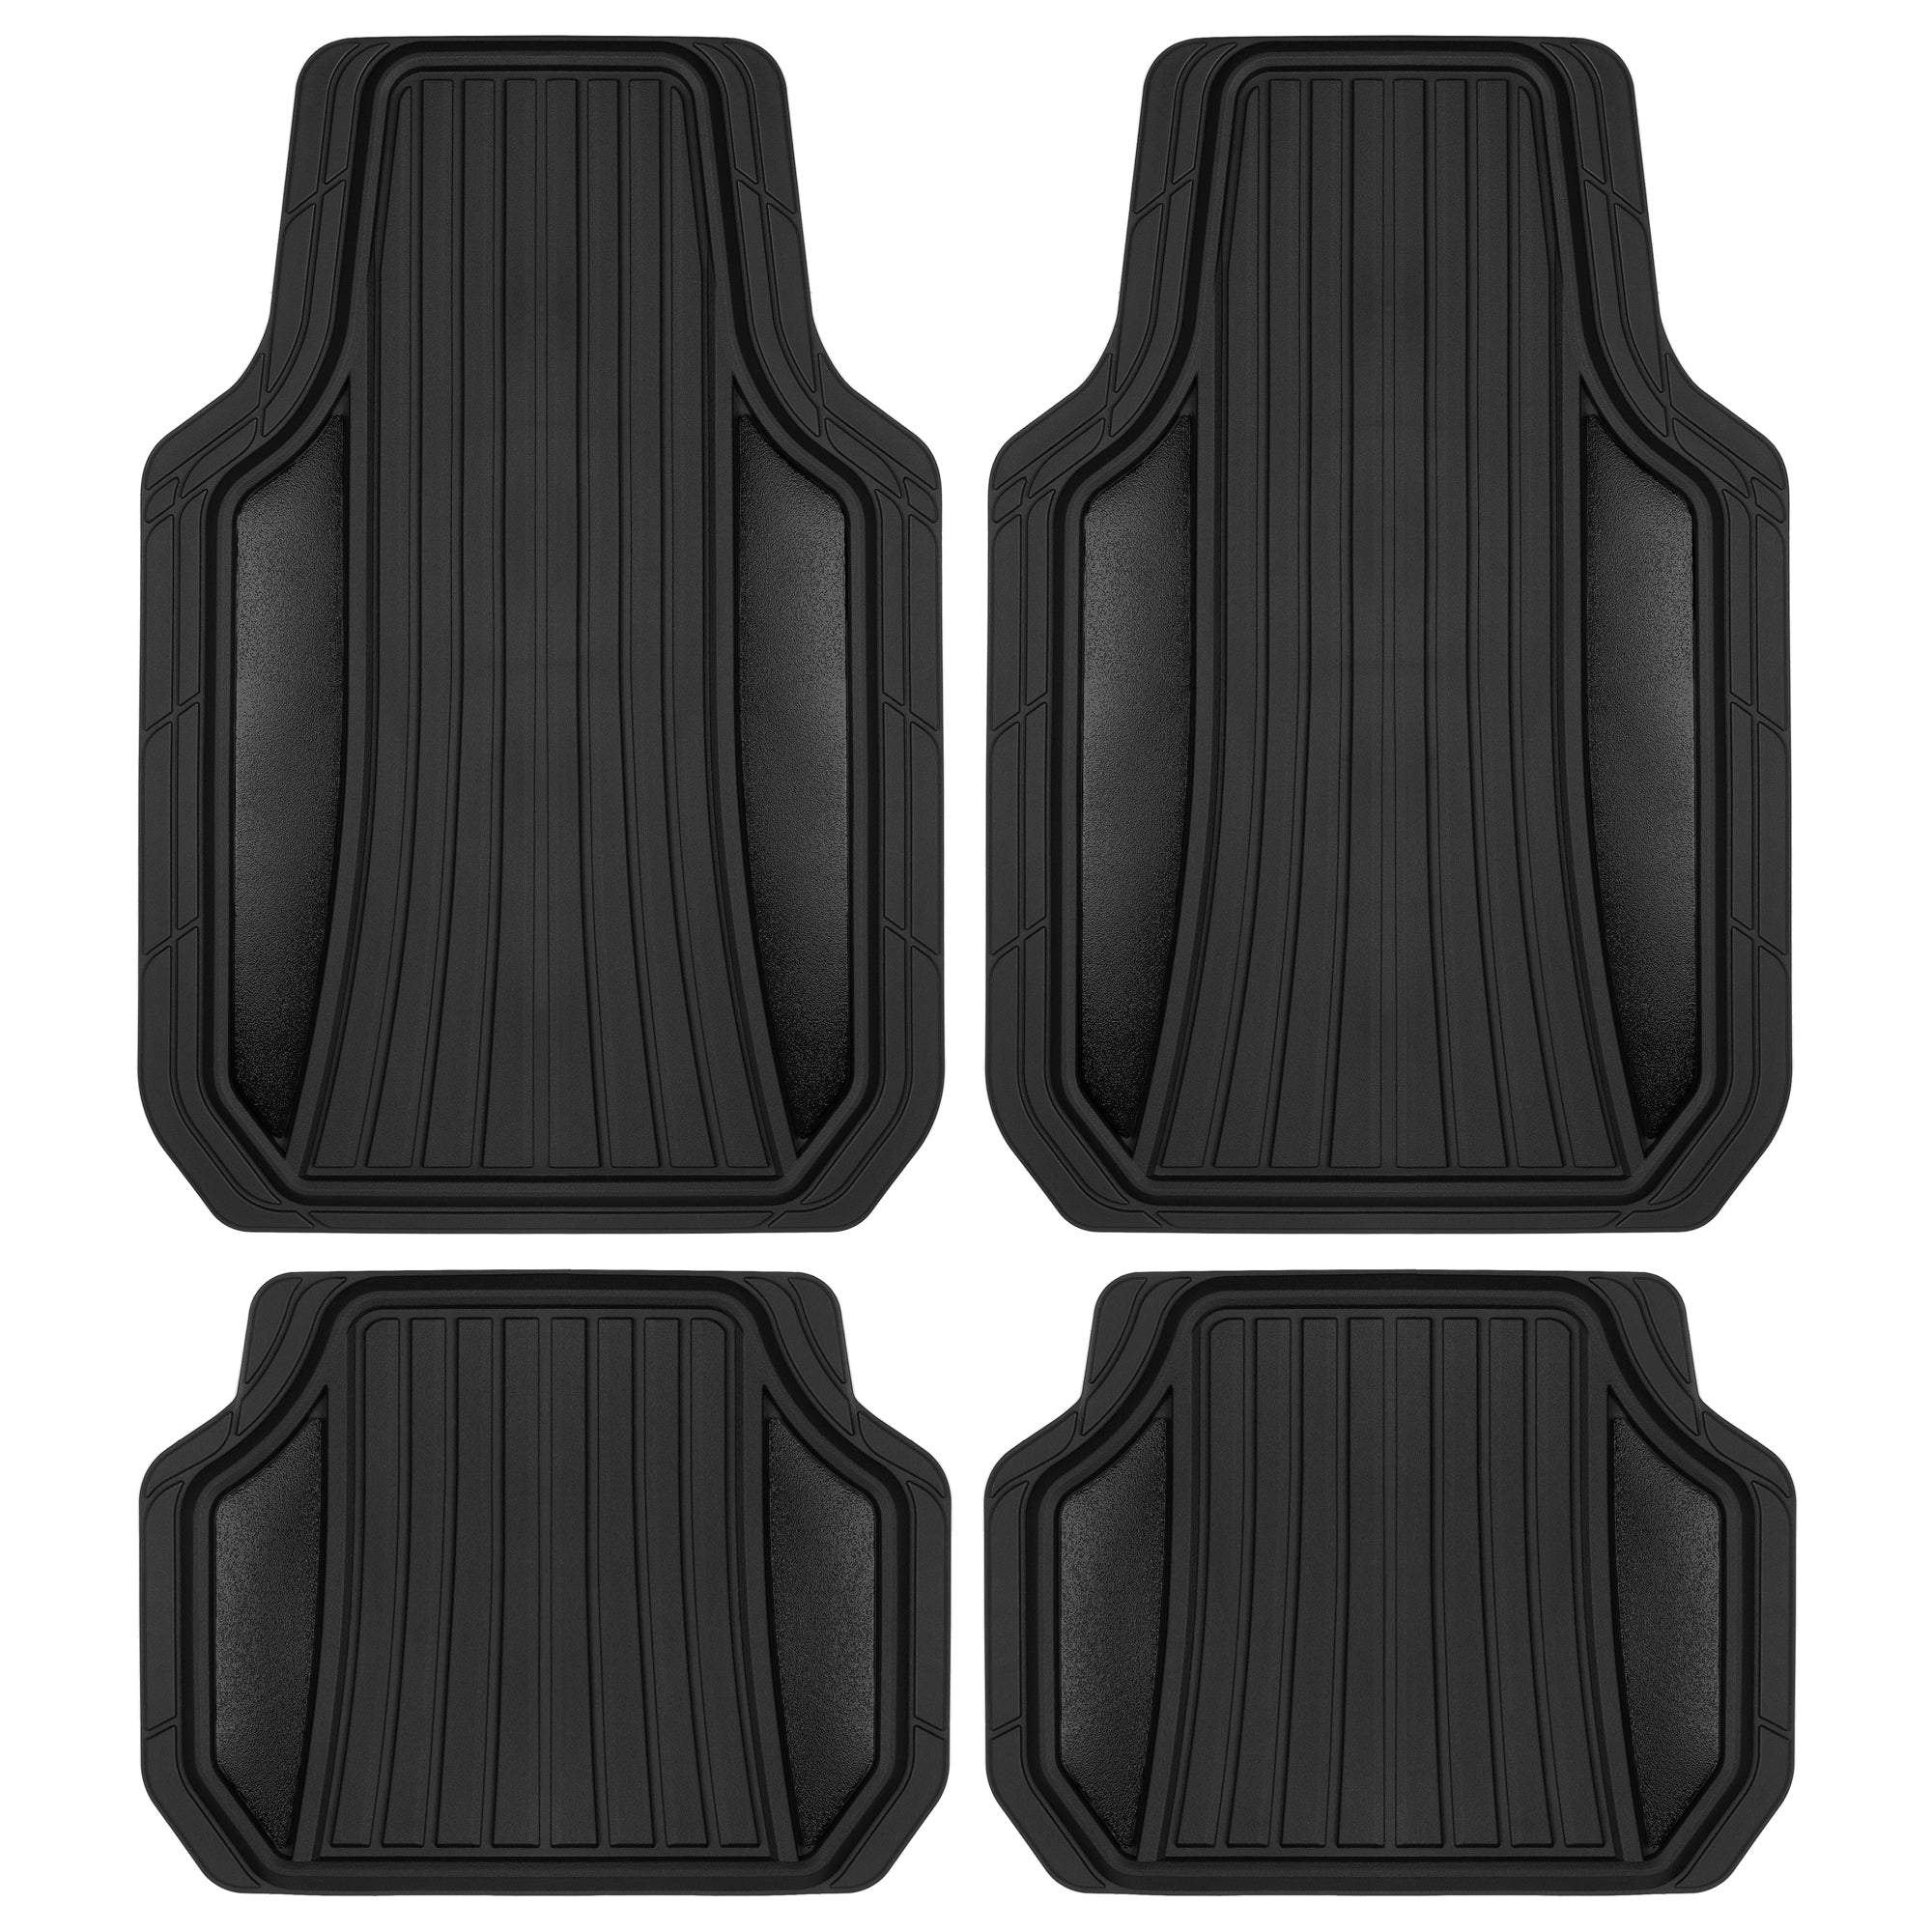 Motor Trend Two Tone Shield Black and Gloss Black Car Floor Mats - Durable Rubber Mats for Enhanced Interior Protection